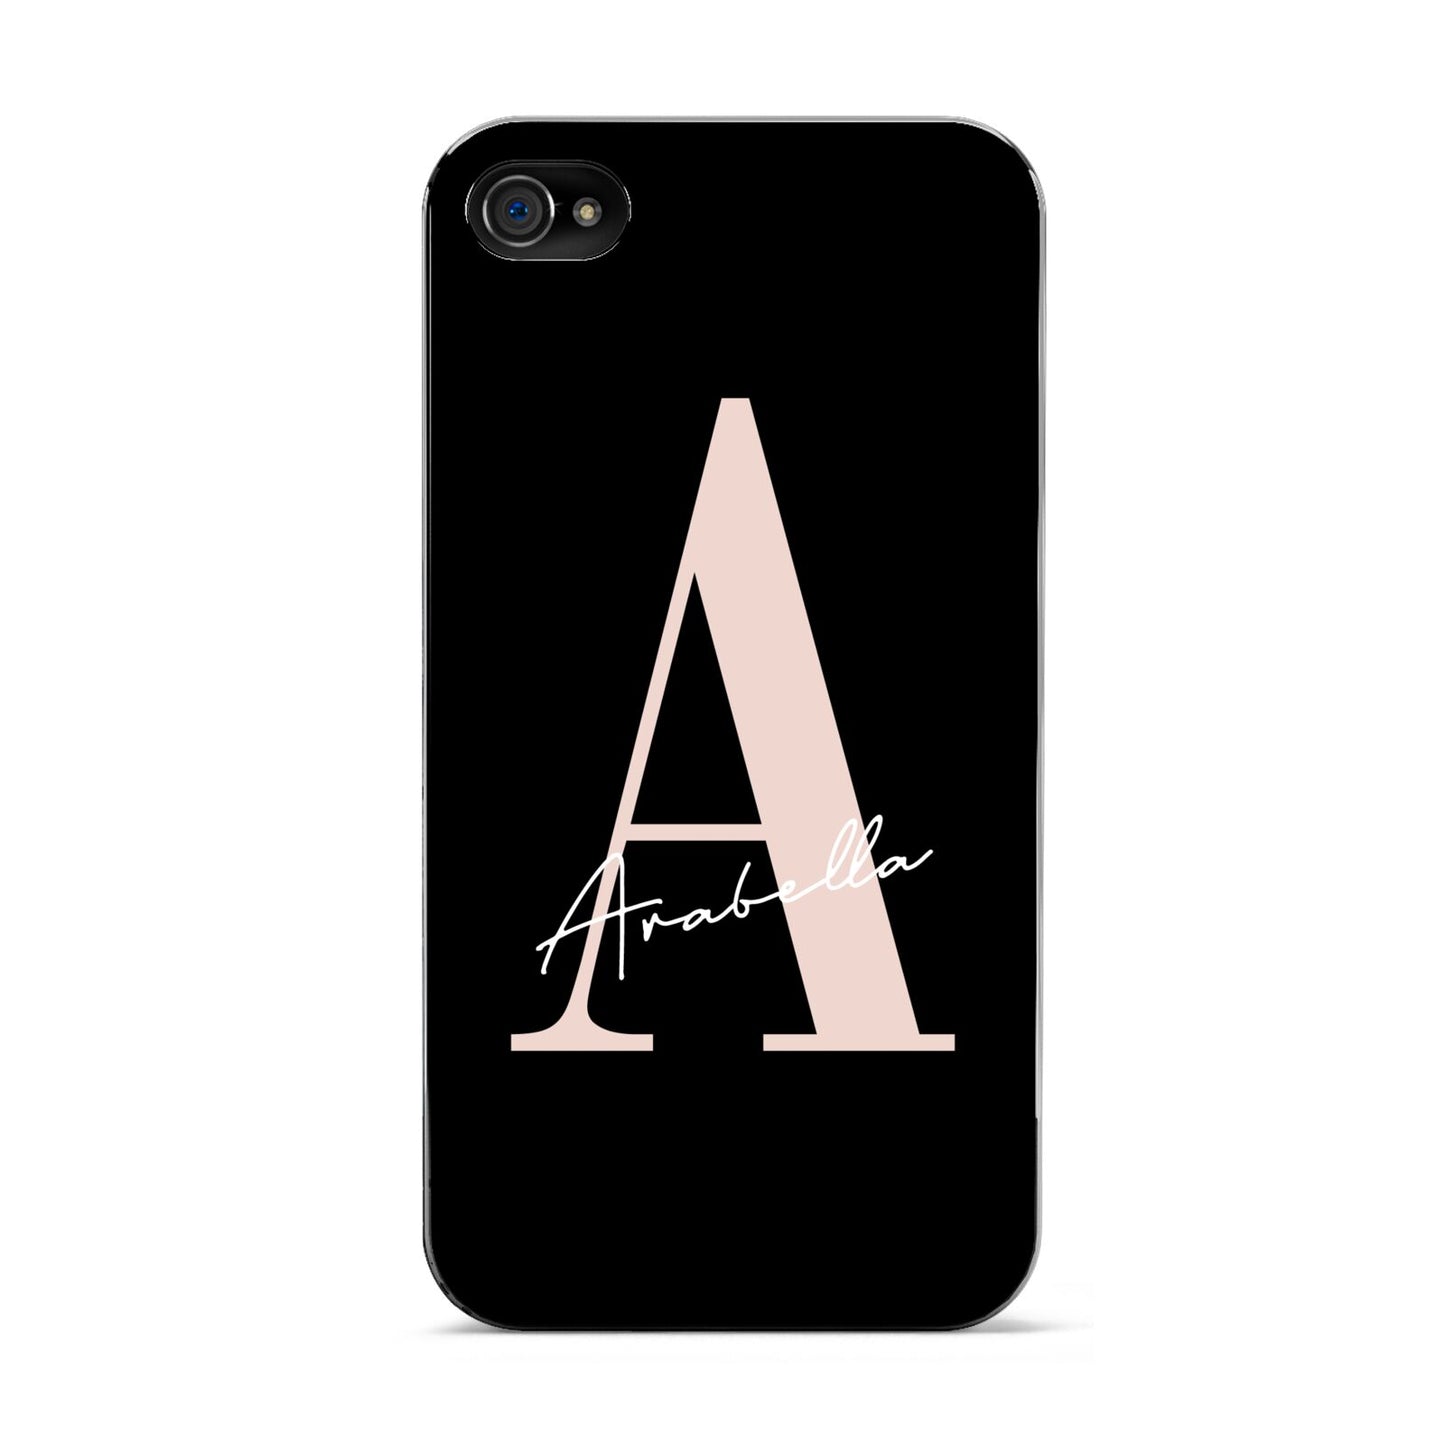 Personalised Black Pink Initial Apple iPhone 4s Case